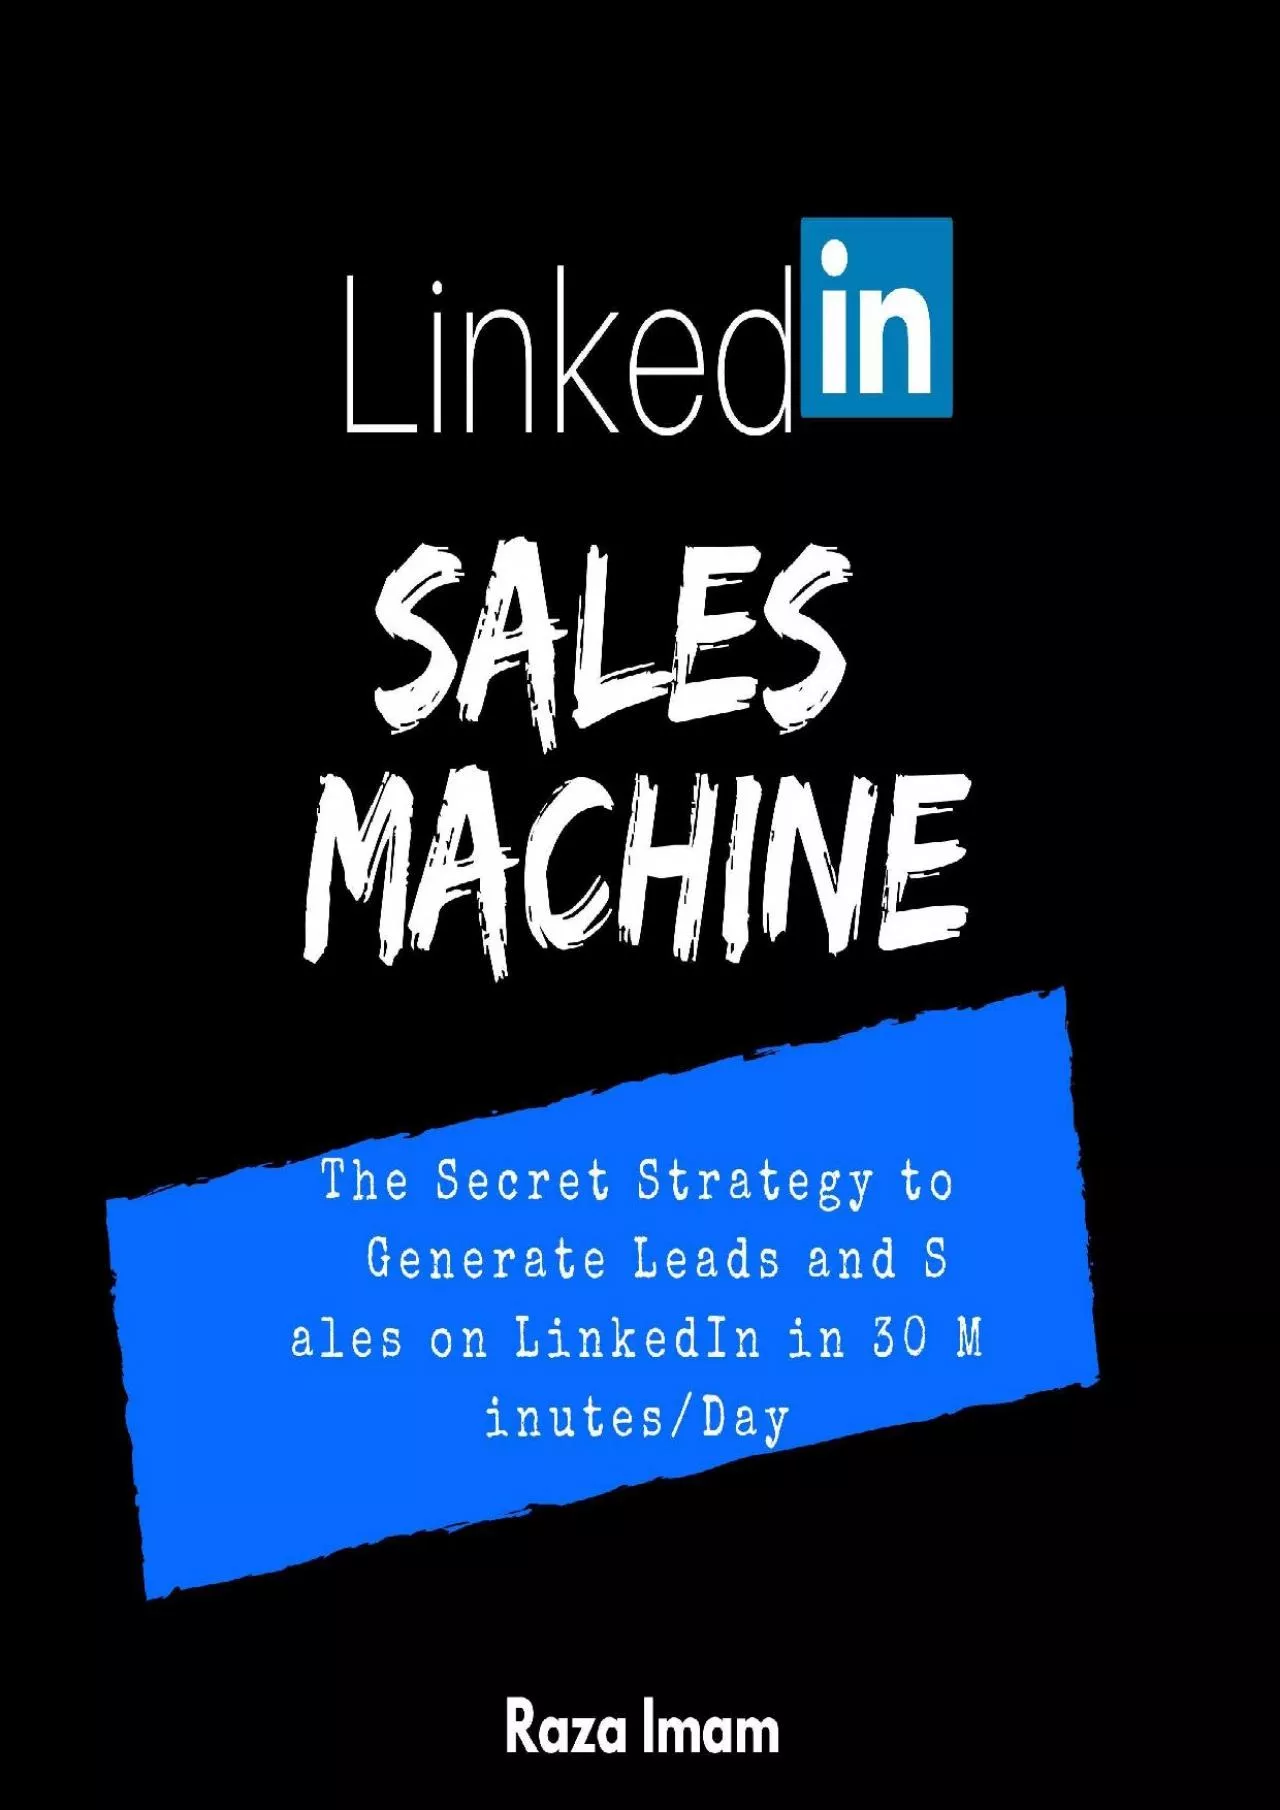 LinkedIn Sales Machine: The Secret Strategy to Generate Leads and Sales on LinkedIn -